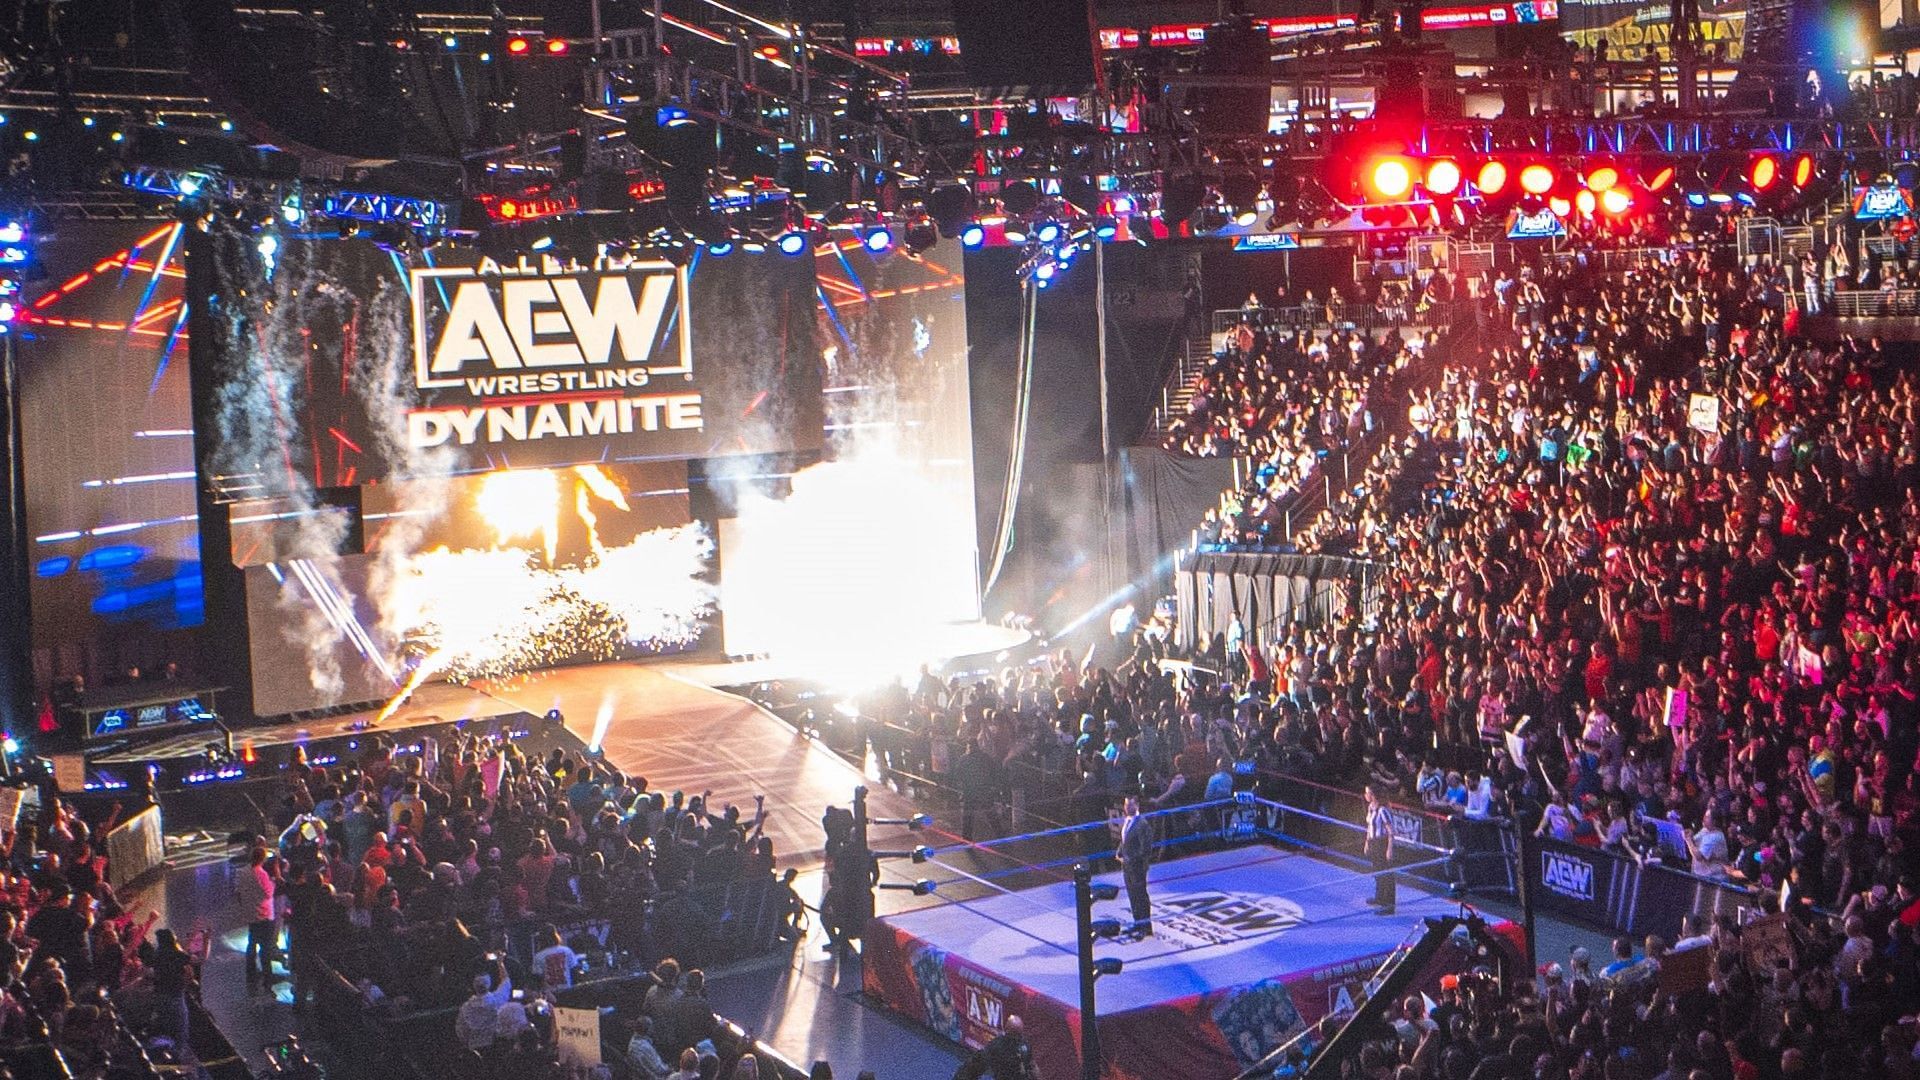 The AEW Dynamite ring and stage/set with a packed crowd.